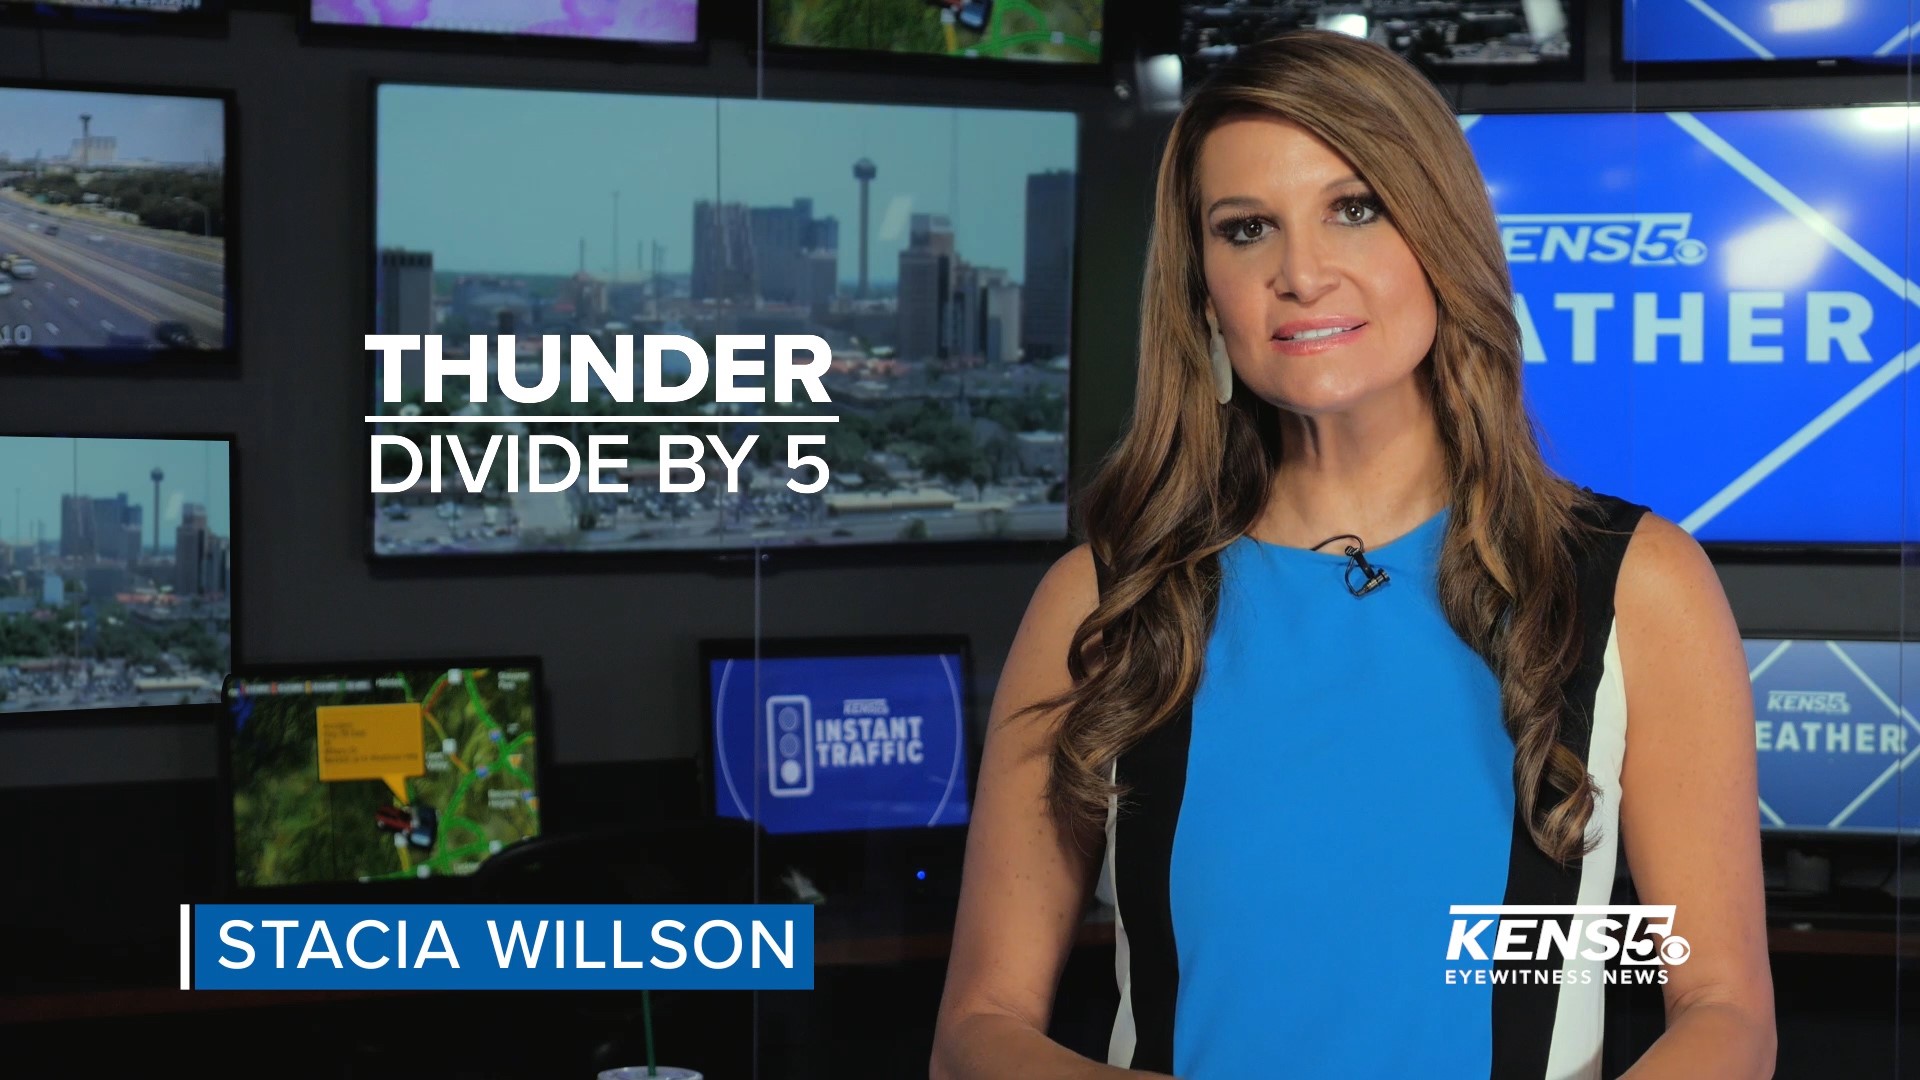 KENS 5's Stacia Willson will teach you a quick trick to find out how close the storm is getting.